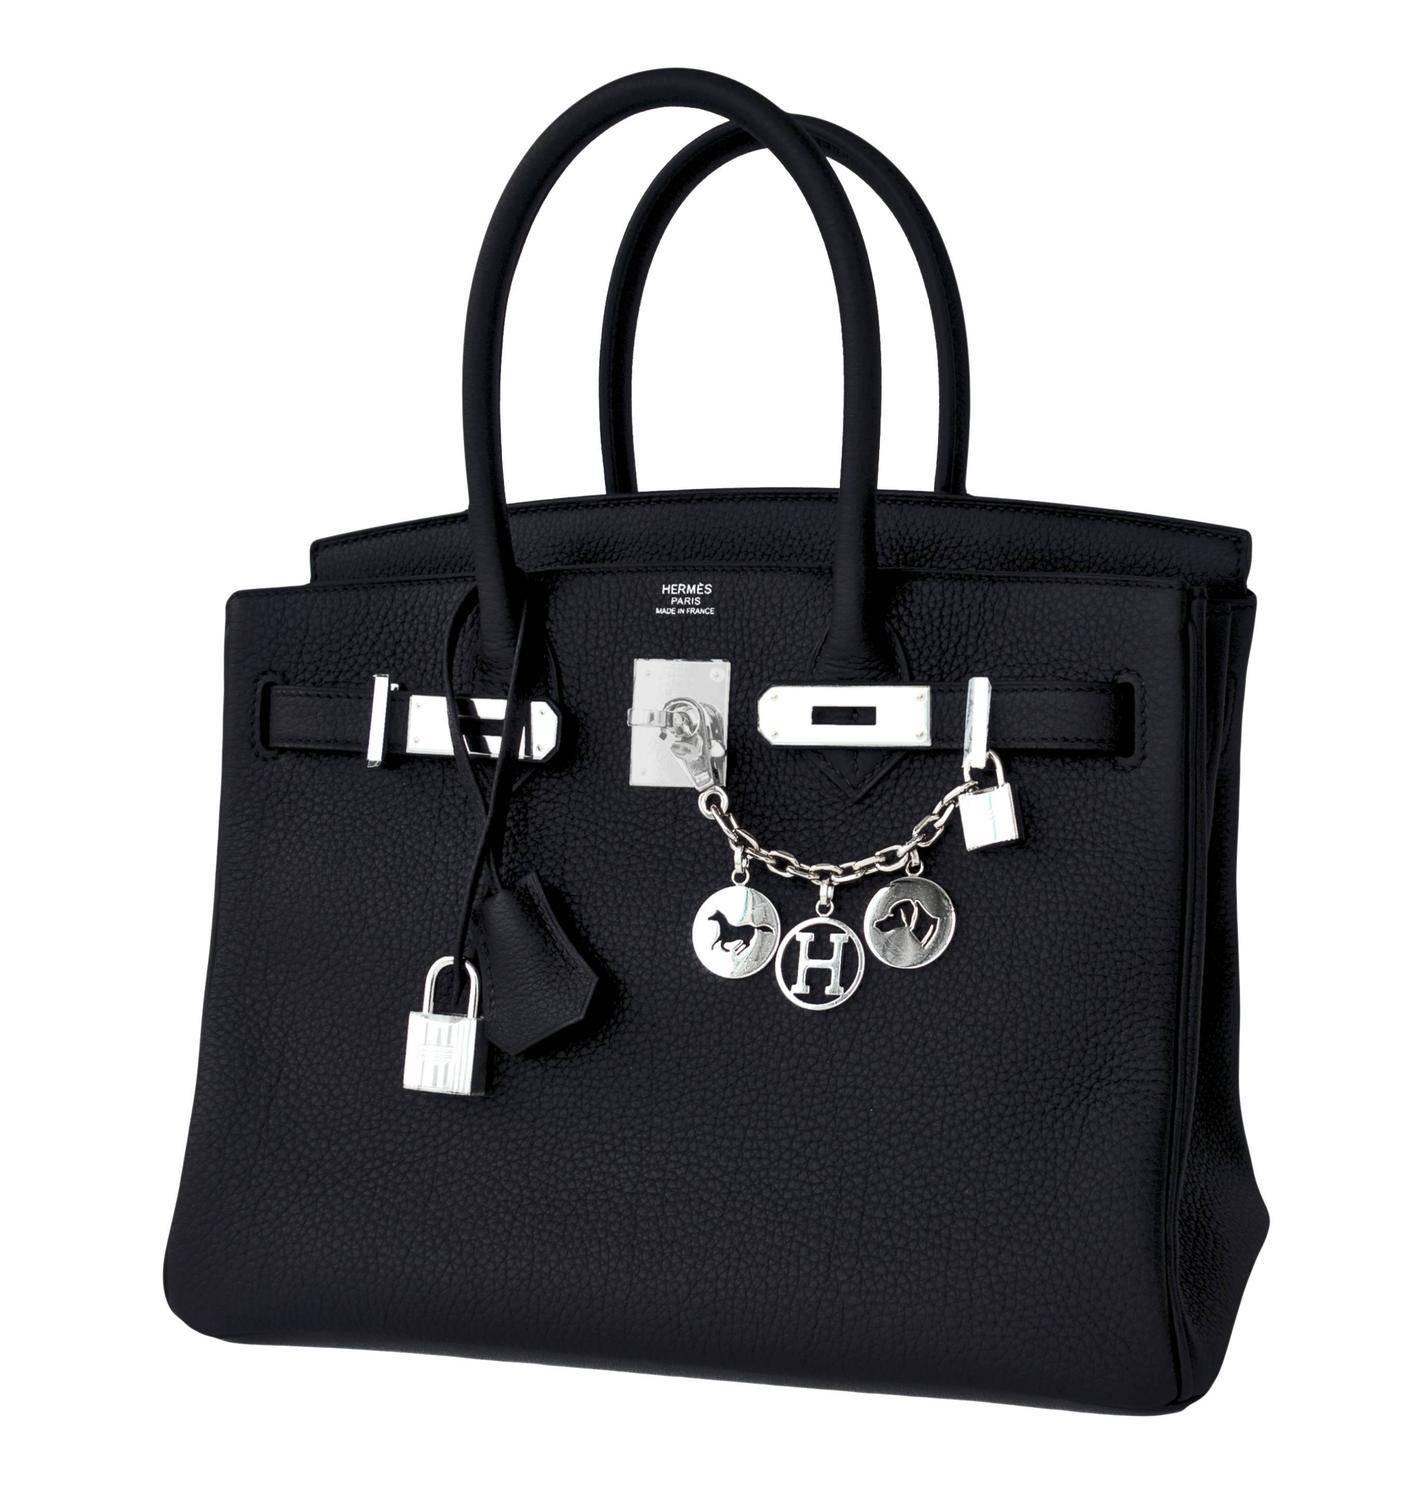 Hermes Black Togo 30cm Birkin Palladium Hardware Leather Bag Chic X Stamp
Brand New in Box. Store fresh. Pristine condition (with plastic on hardware)
Just purchased from Hermes store in 2016; bag bears interior 2016 X stamp.
Comes with keys,